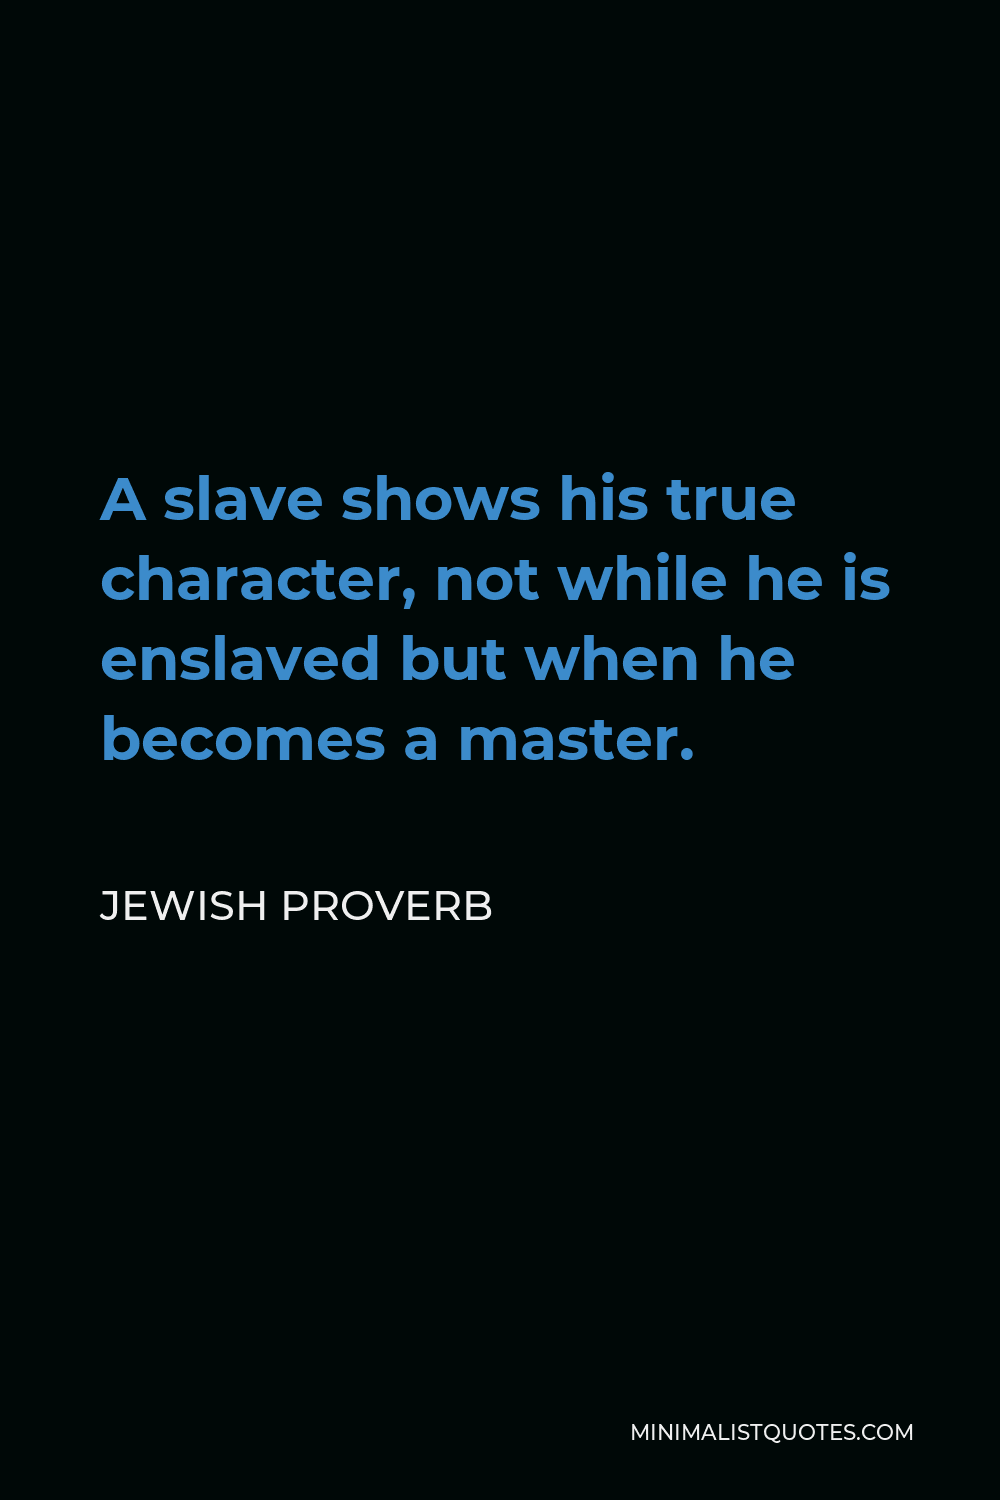 Jewish Proverb Quote - A slave shows his true character, not while he is enslaved but when he becomes a master.